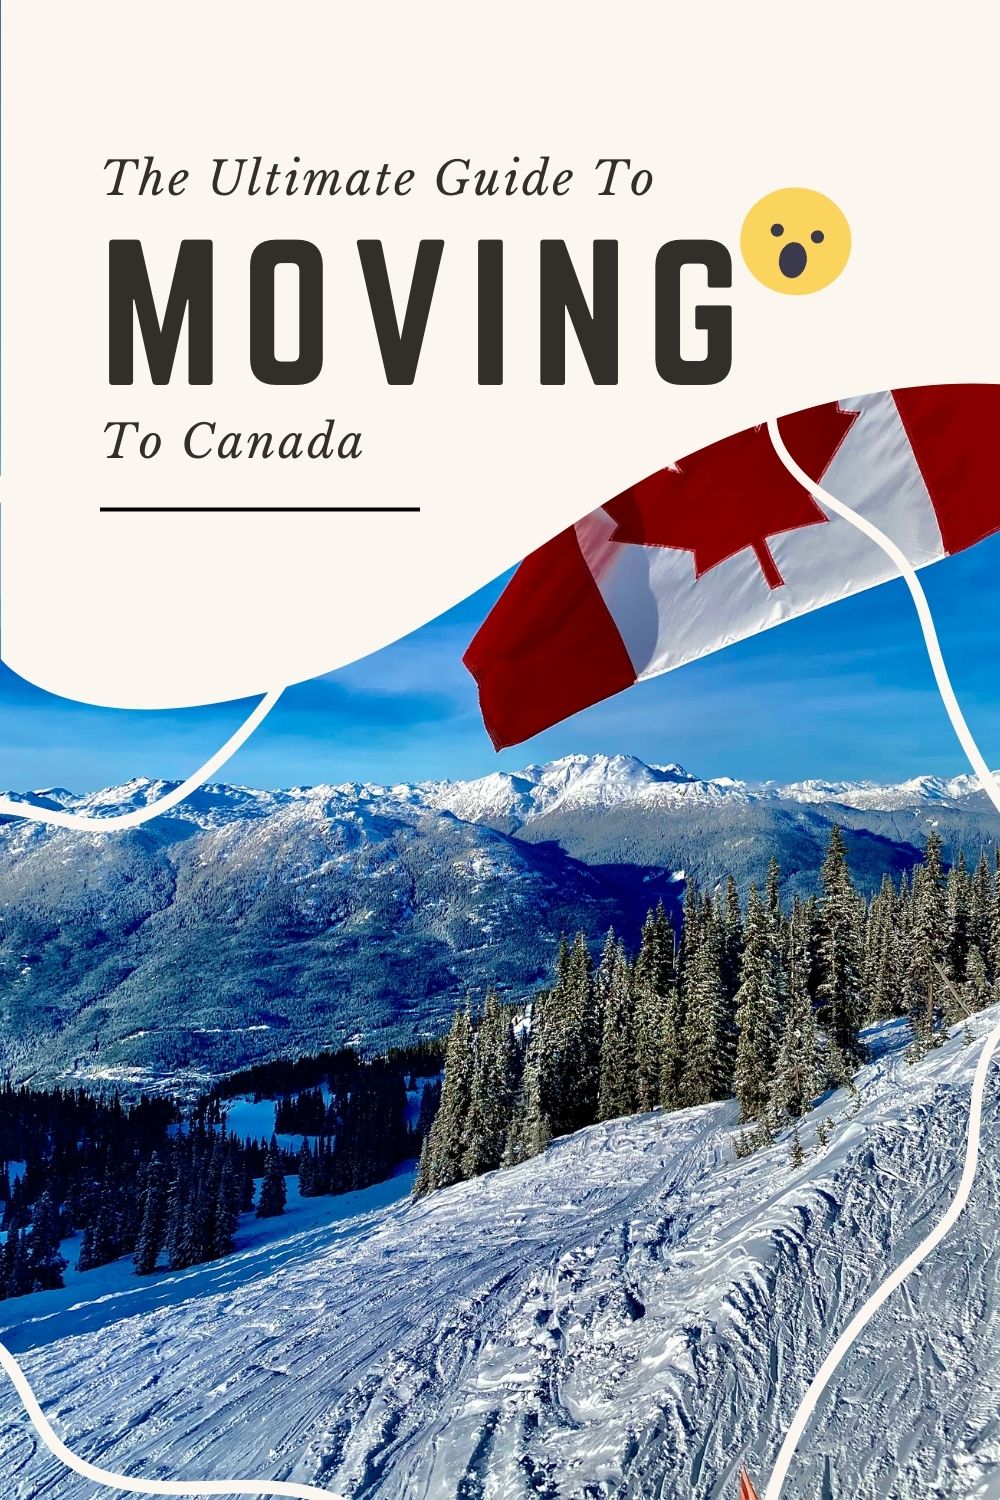 The Perfect Buying Guide for an American Moving to Canada